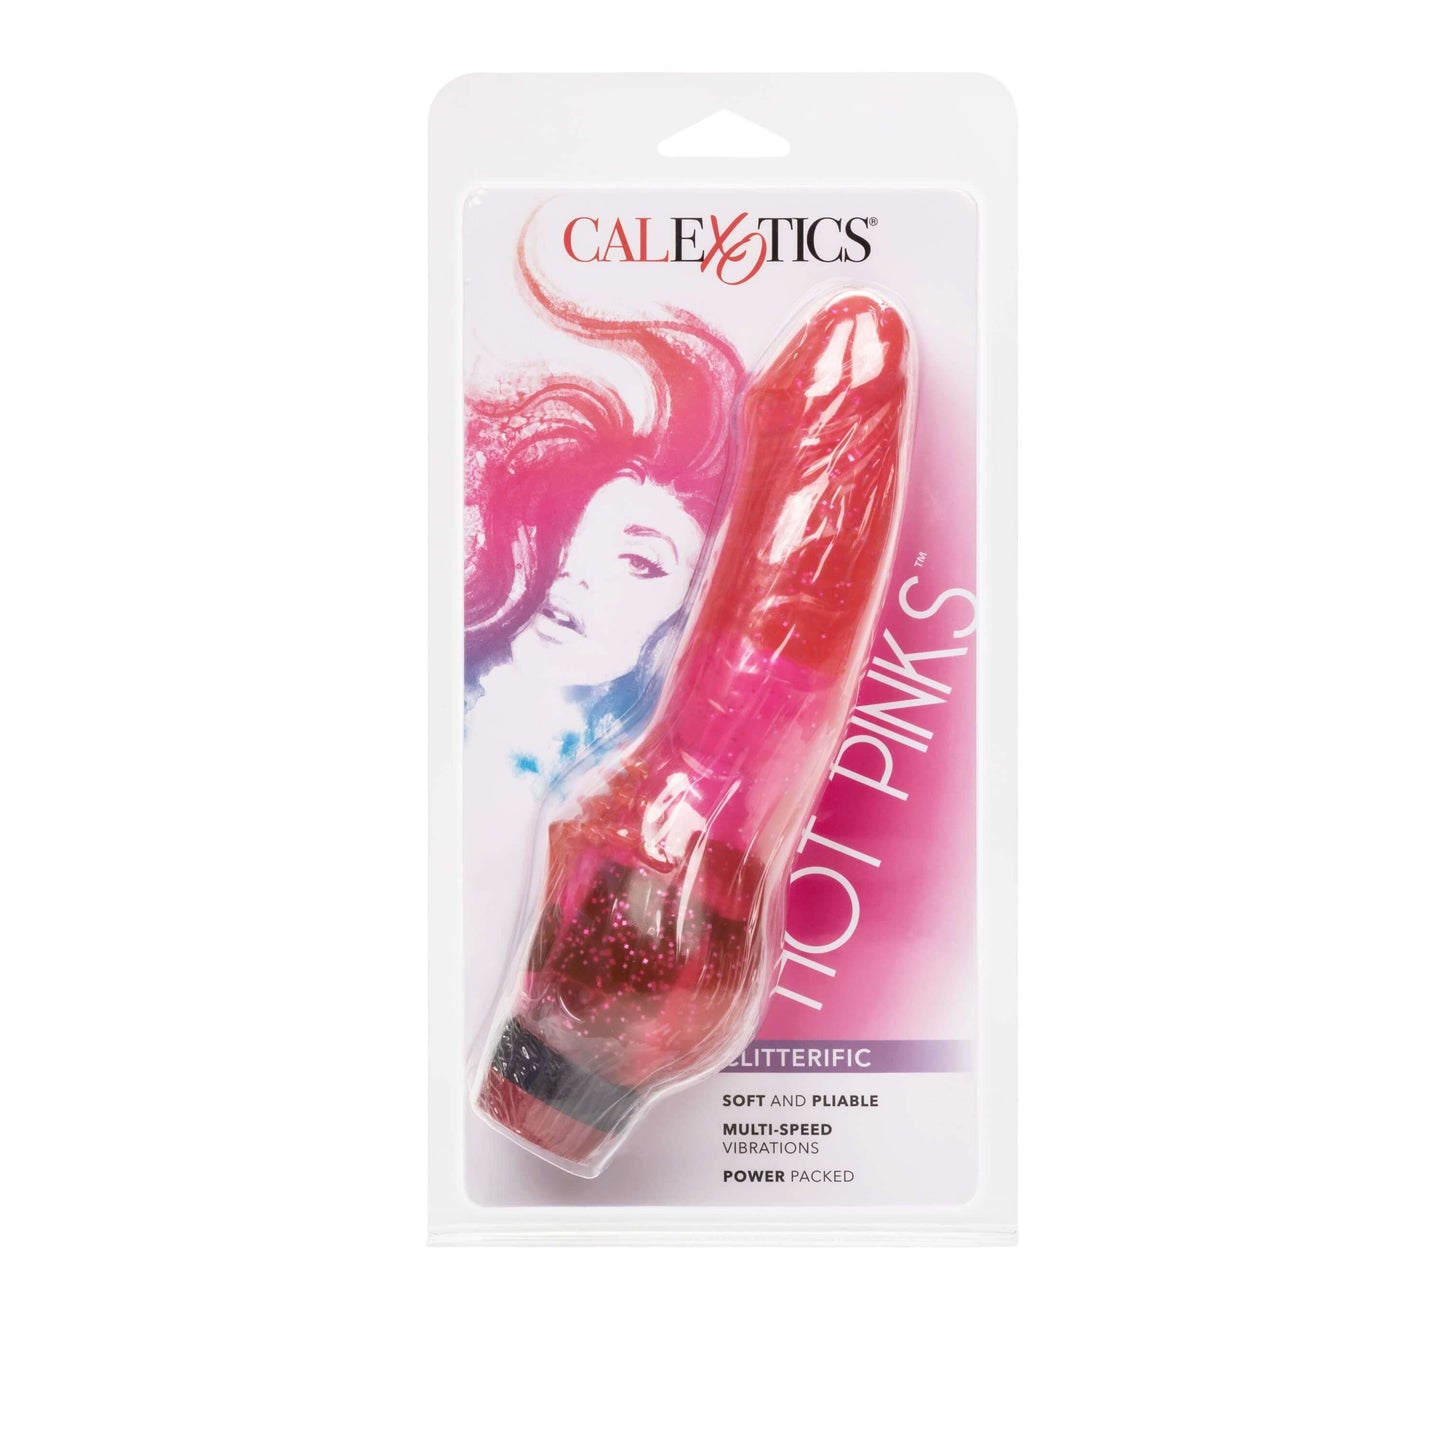 Clitterific 8" Dong - Hot Pink - Thorn & Feather Sex Toy Canada